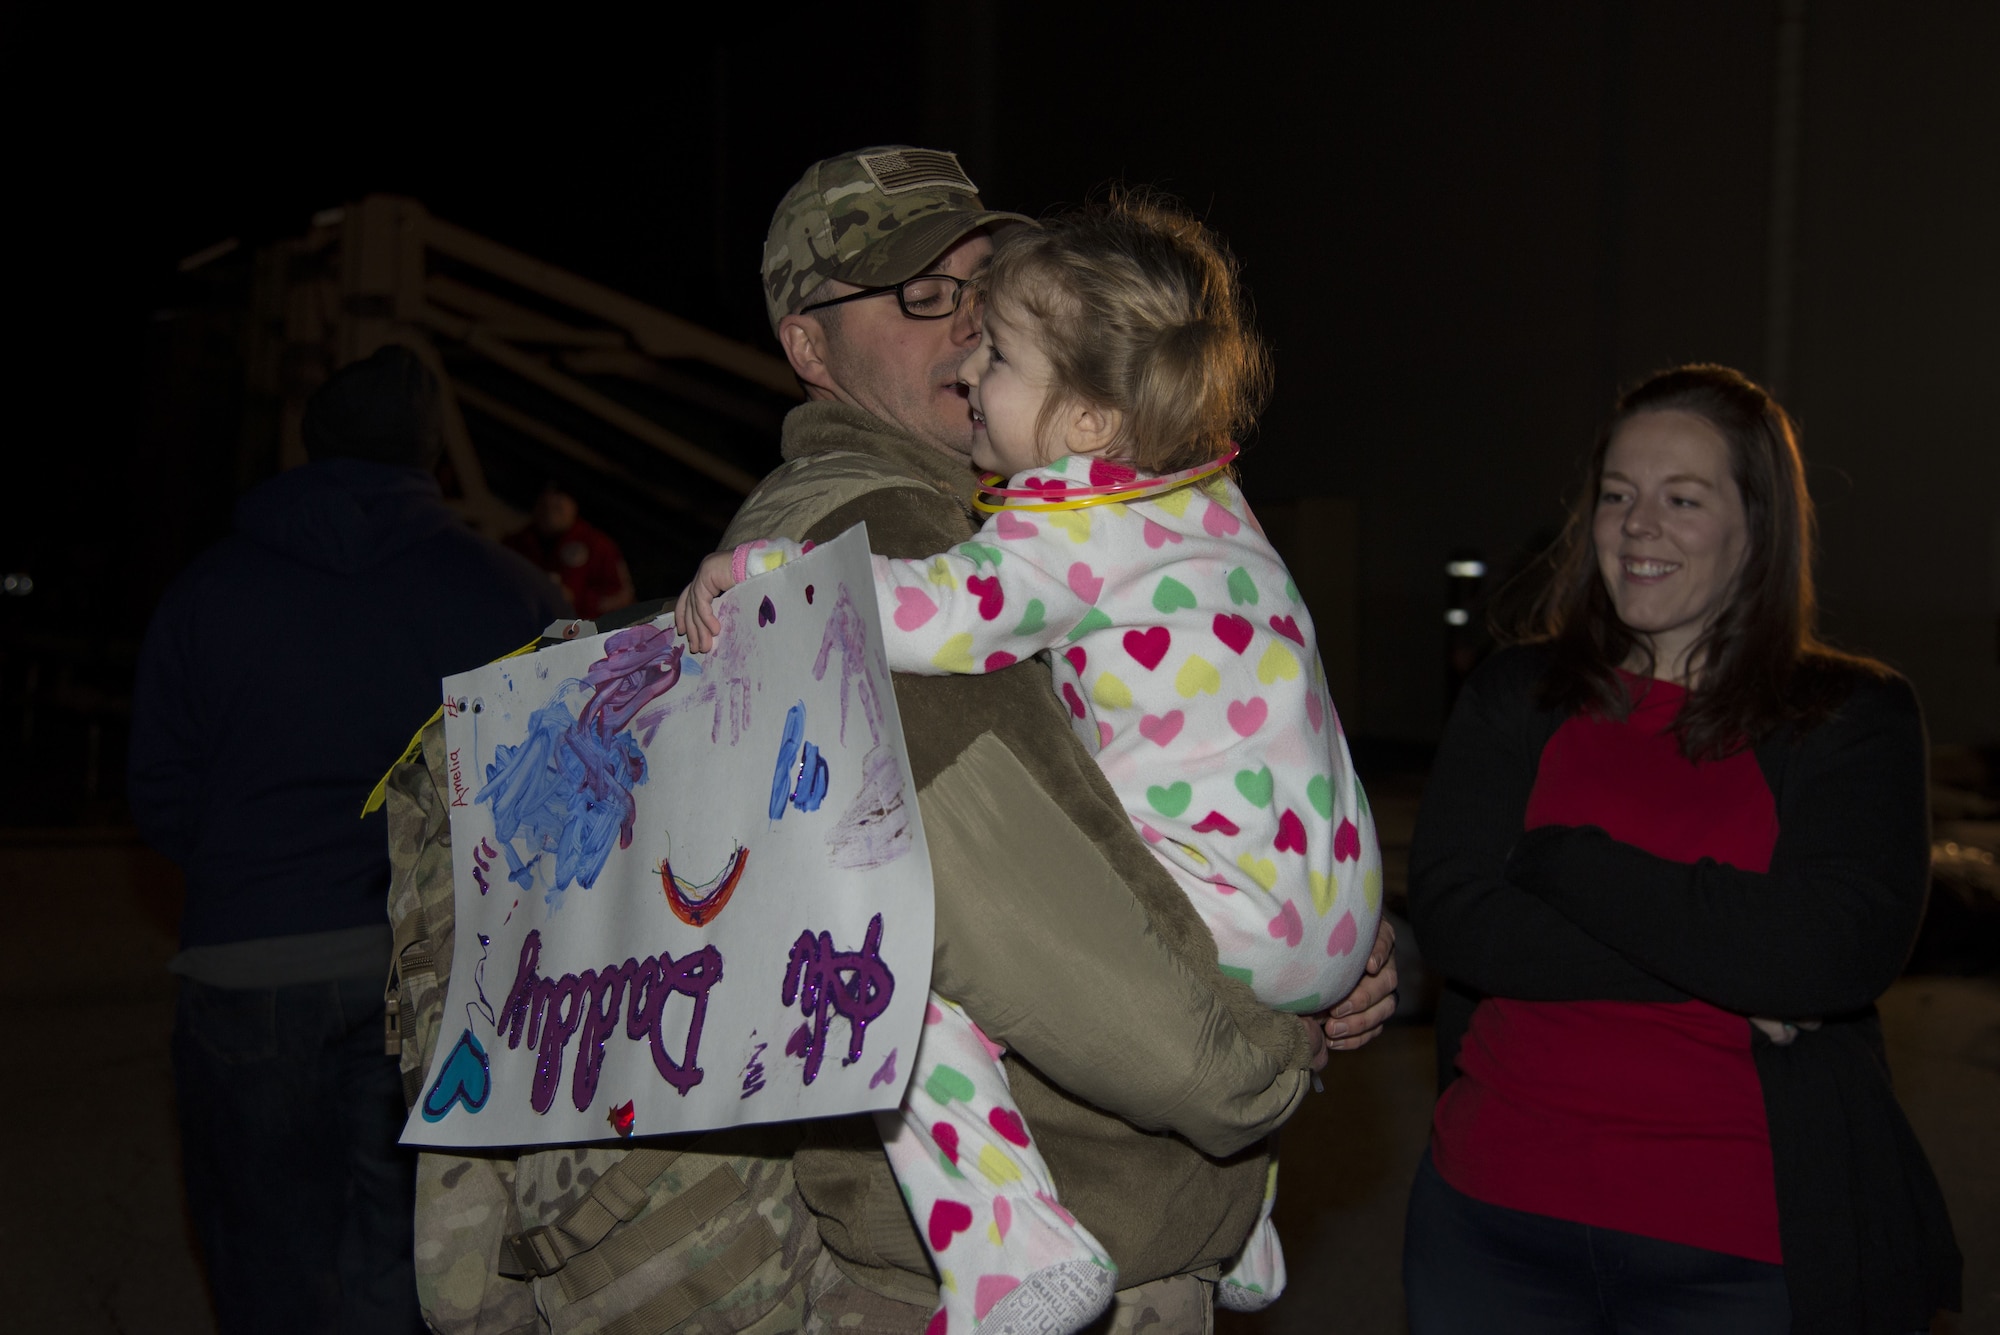 Master Sgt. Michael Johnson, 436th Security Forces Squadron defender, hugs his daughter, Amelia, as his wife, Kelly, looks on Jan. 21, 2018, at Dover Air Force Base, Del. The Johnson family was reunited after a six-month deployment to the Middle East. (U.S. Air Force Photo by Staff Sgt. Aaron J. Jenne)